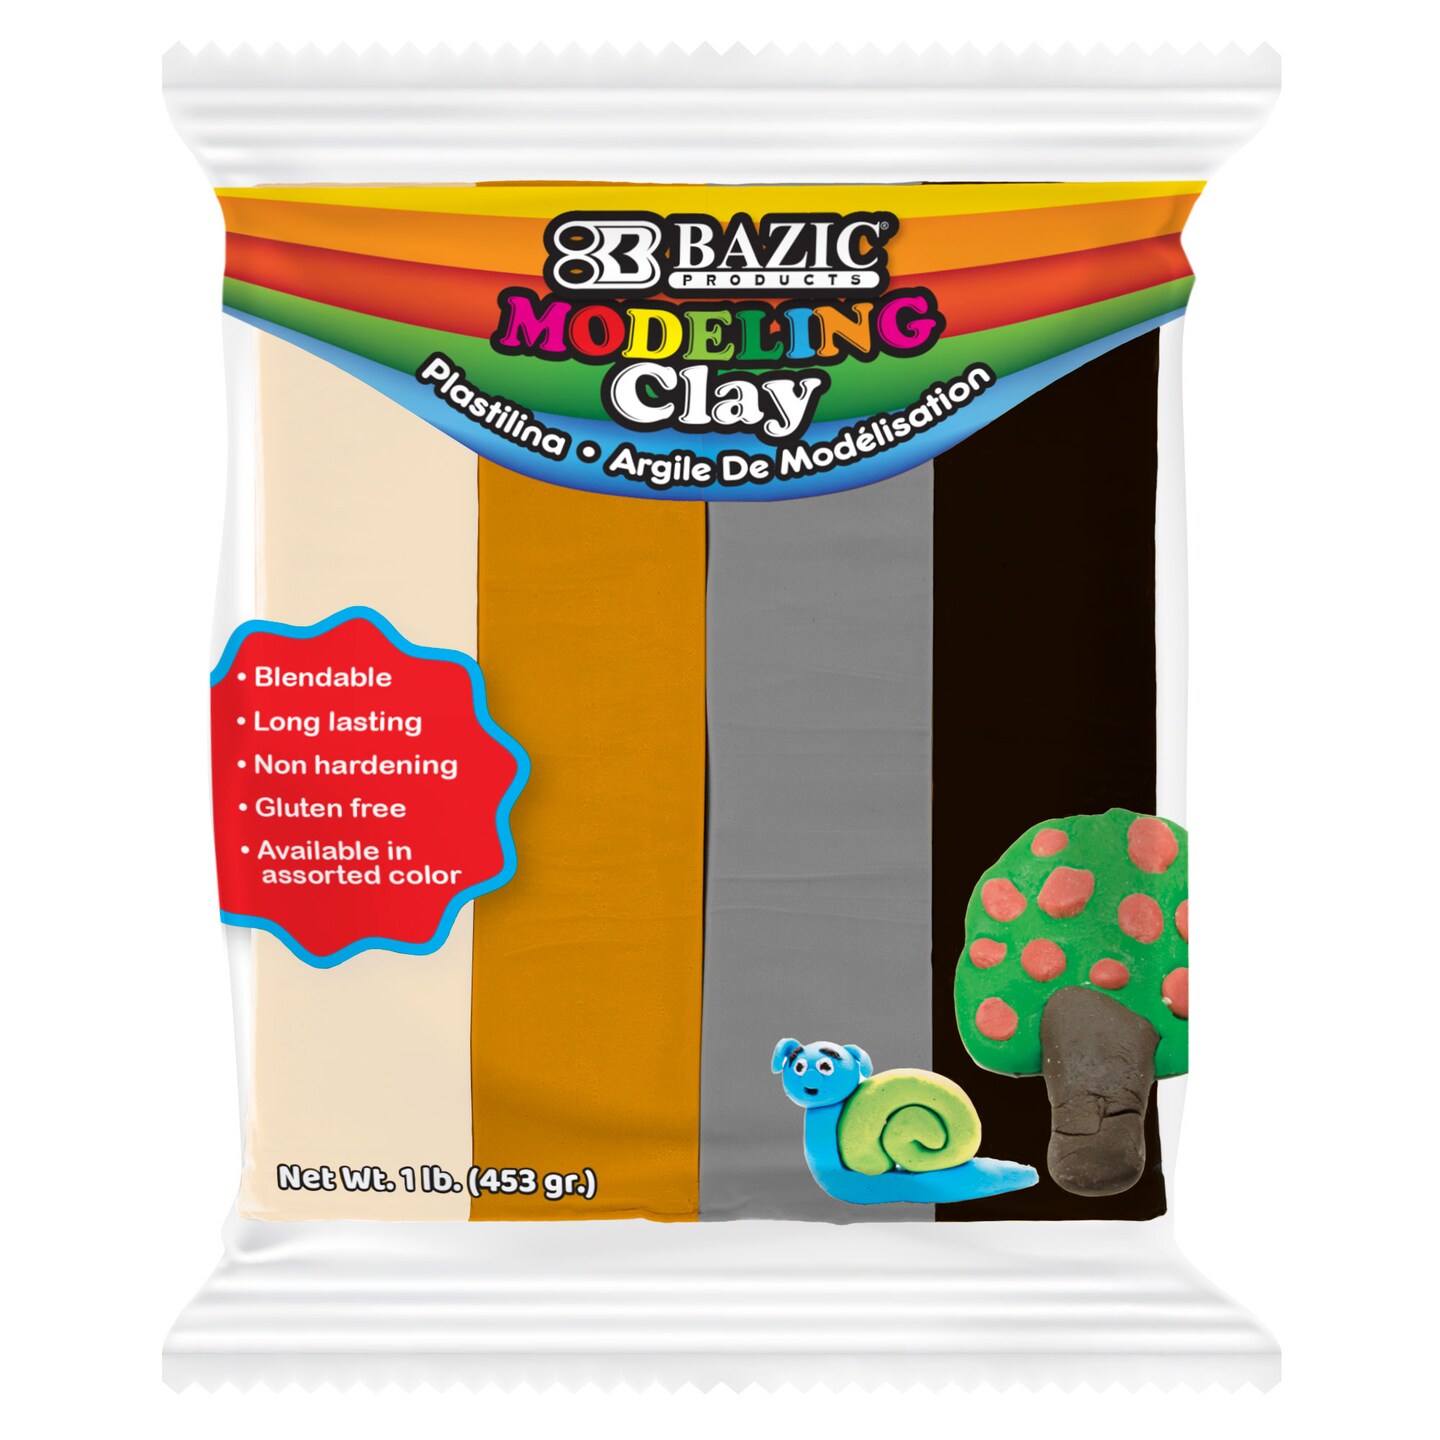 BAZIC Modeling Clay Sticks 1 lb 4 Natural/Earth Color